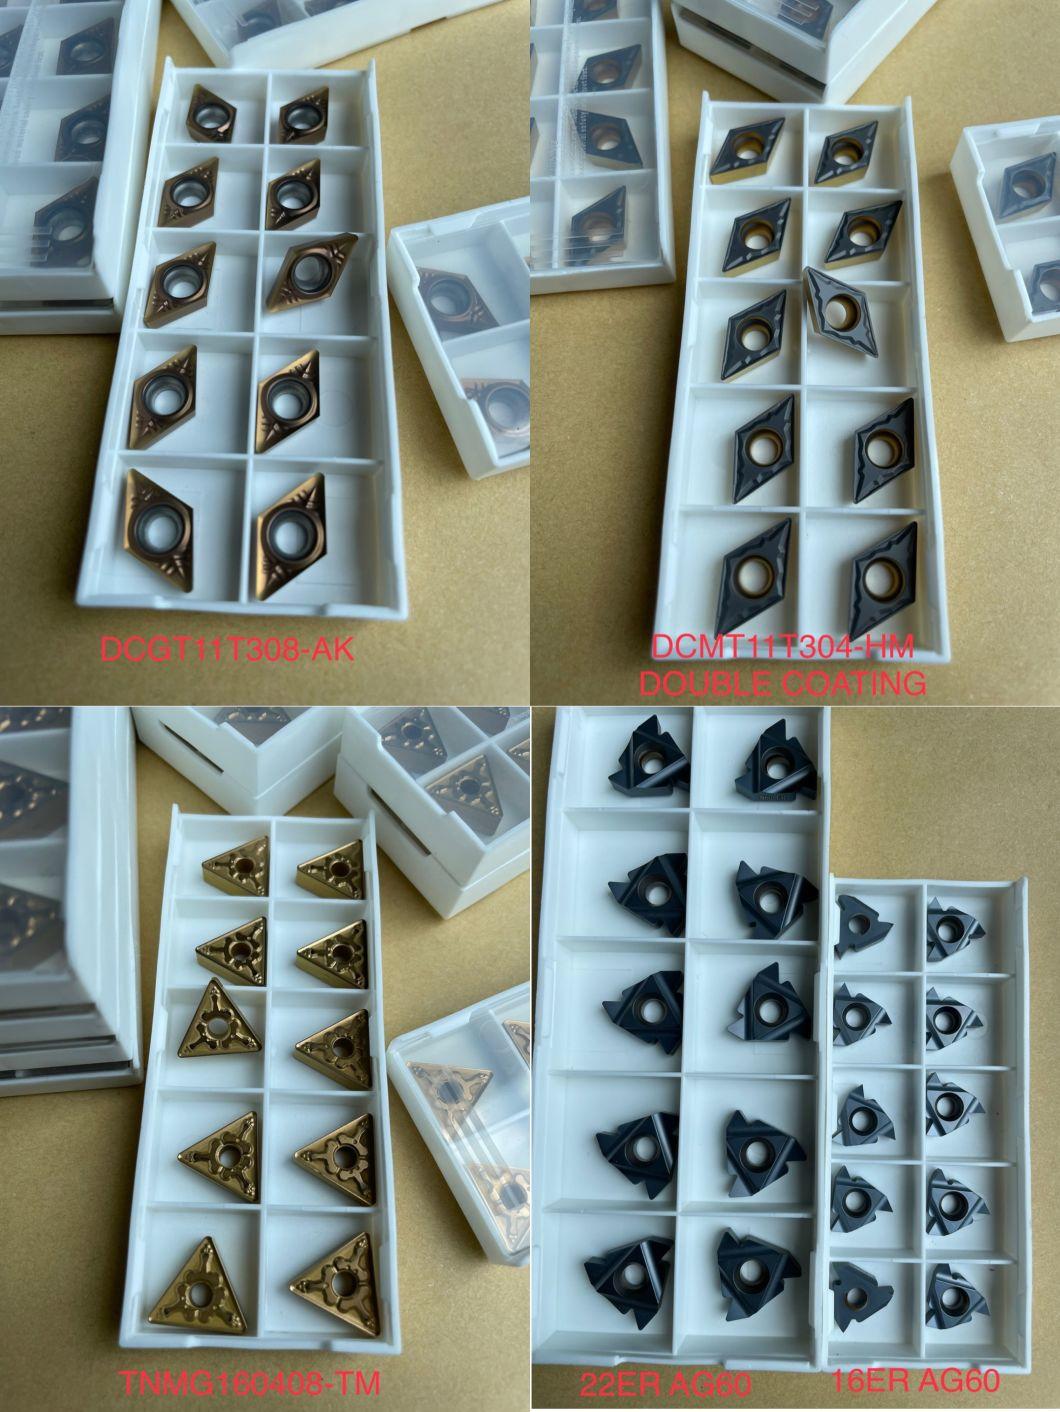 Tdc Tdj Tdt CNC Carbide Insert Lathe Tool Parting and Grooving Tools for Stainless Steel